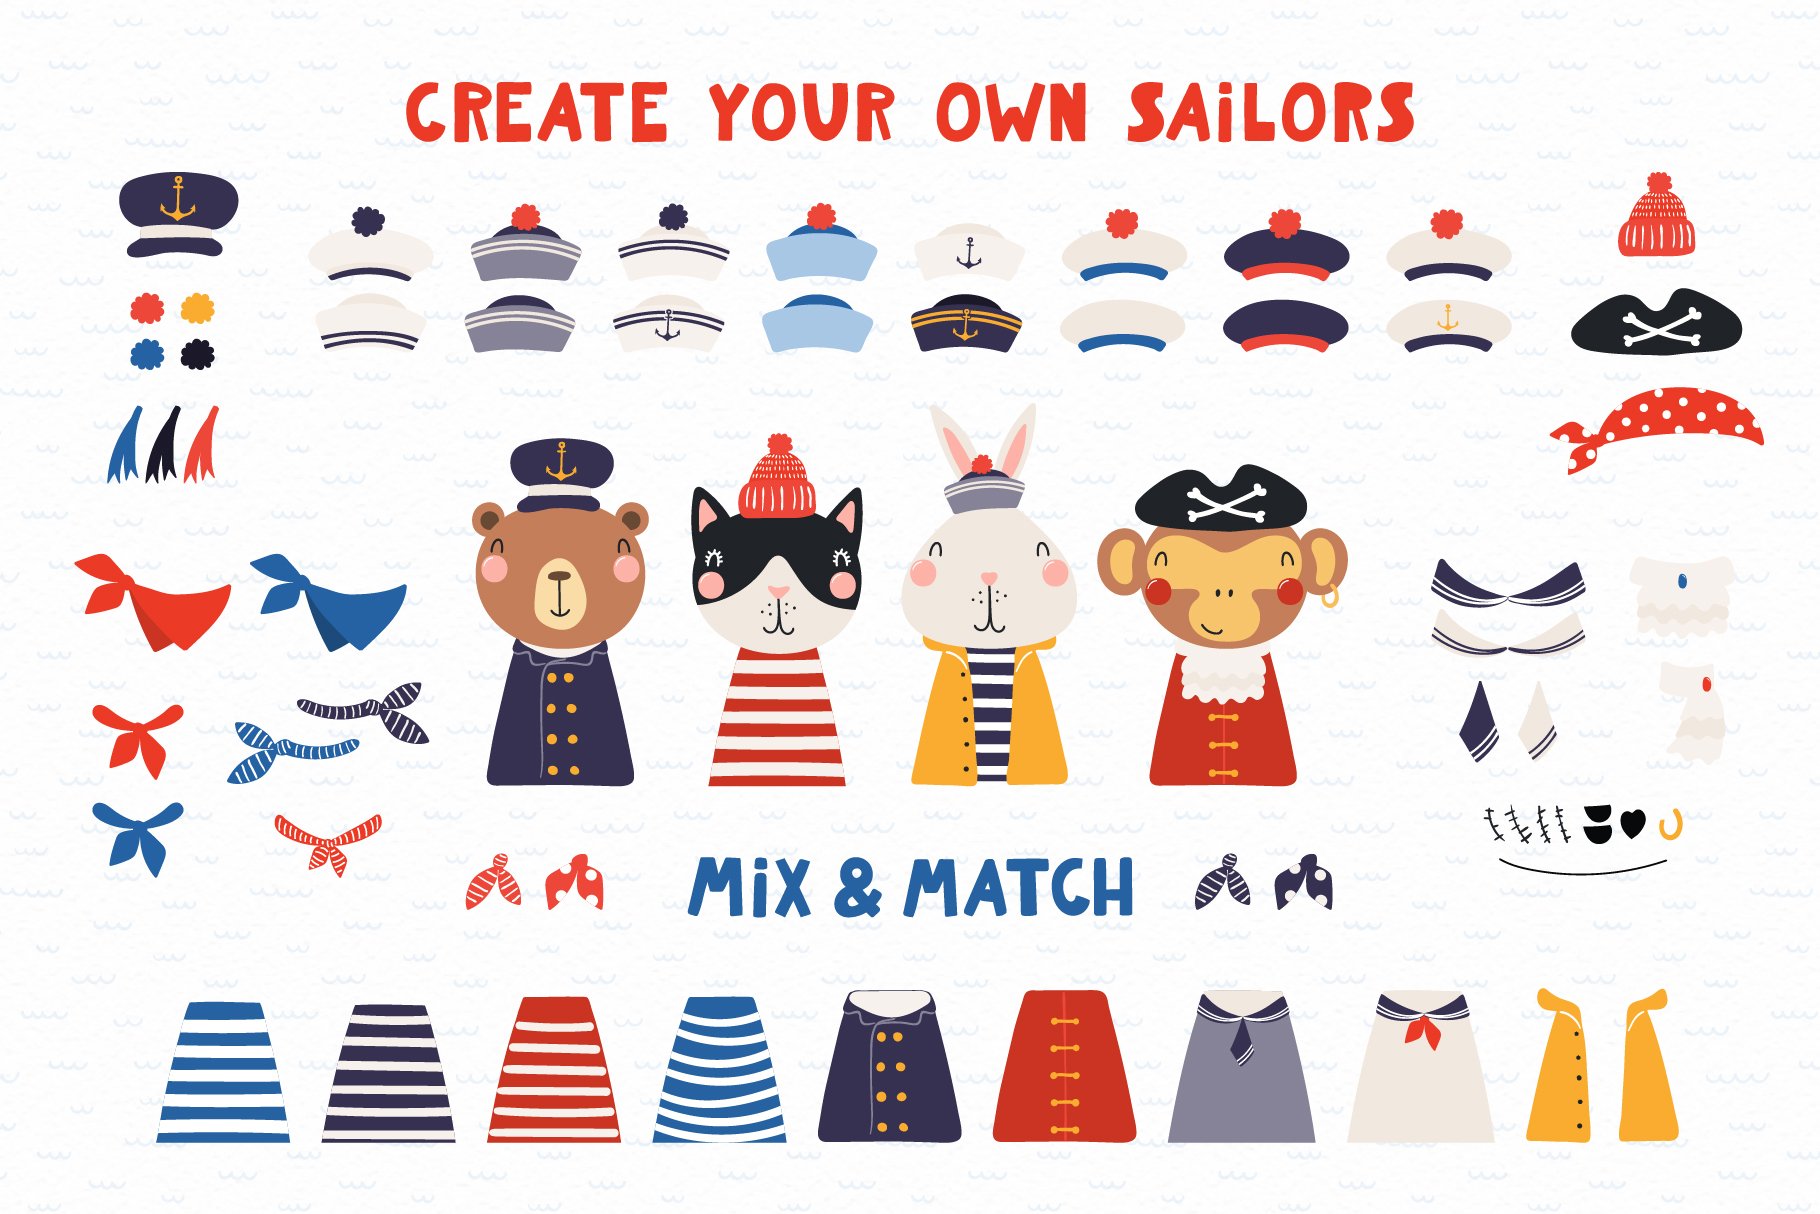 Create your own sailors with this collection.